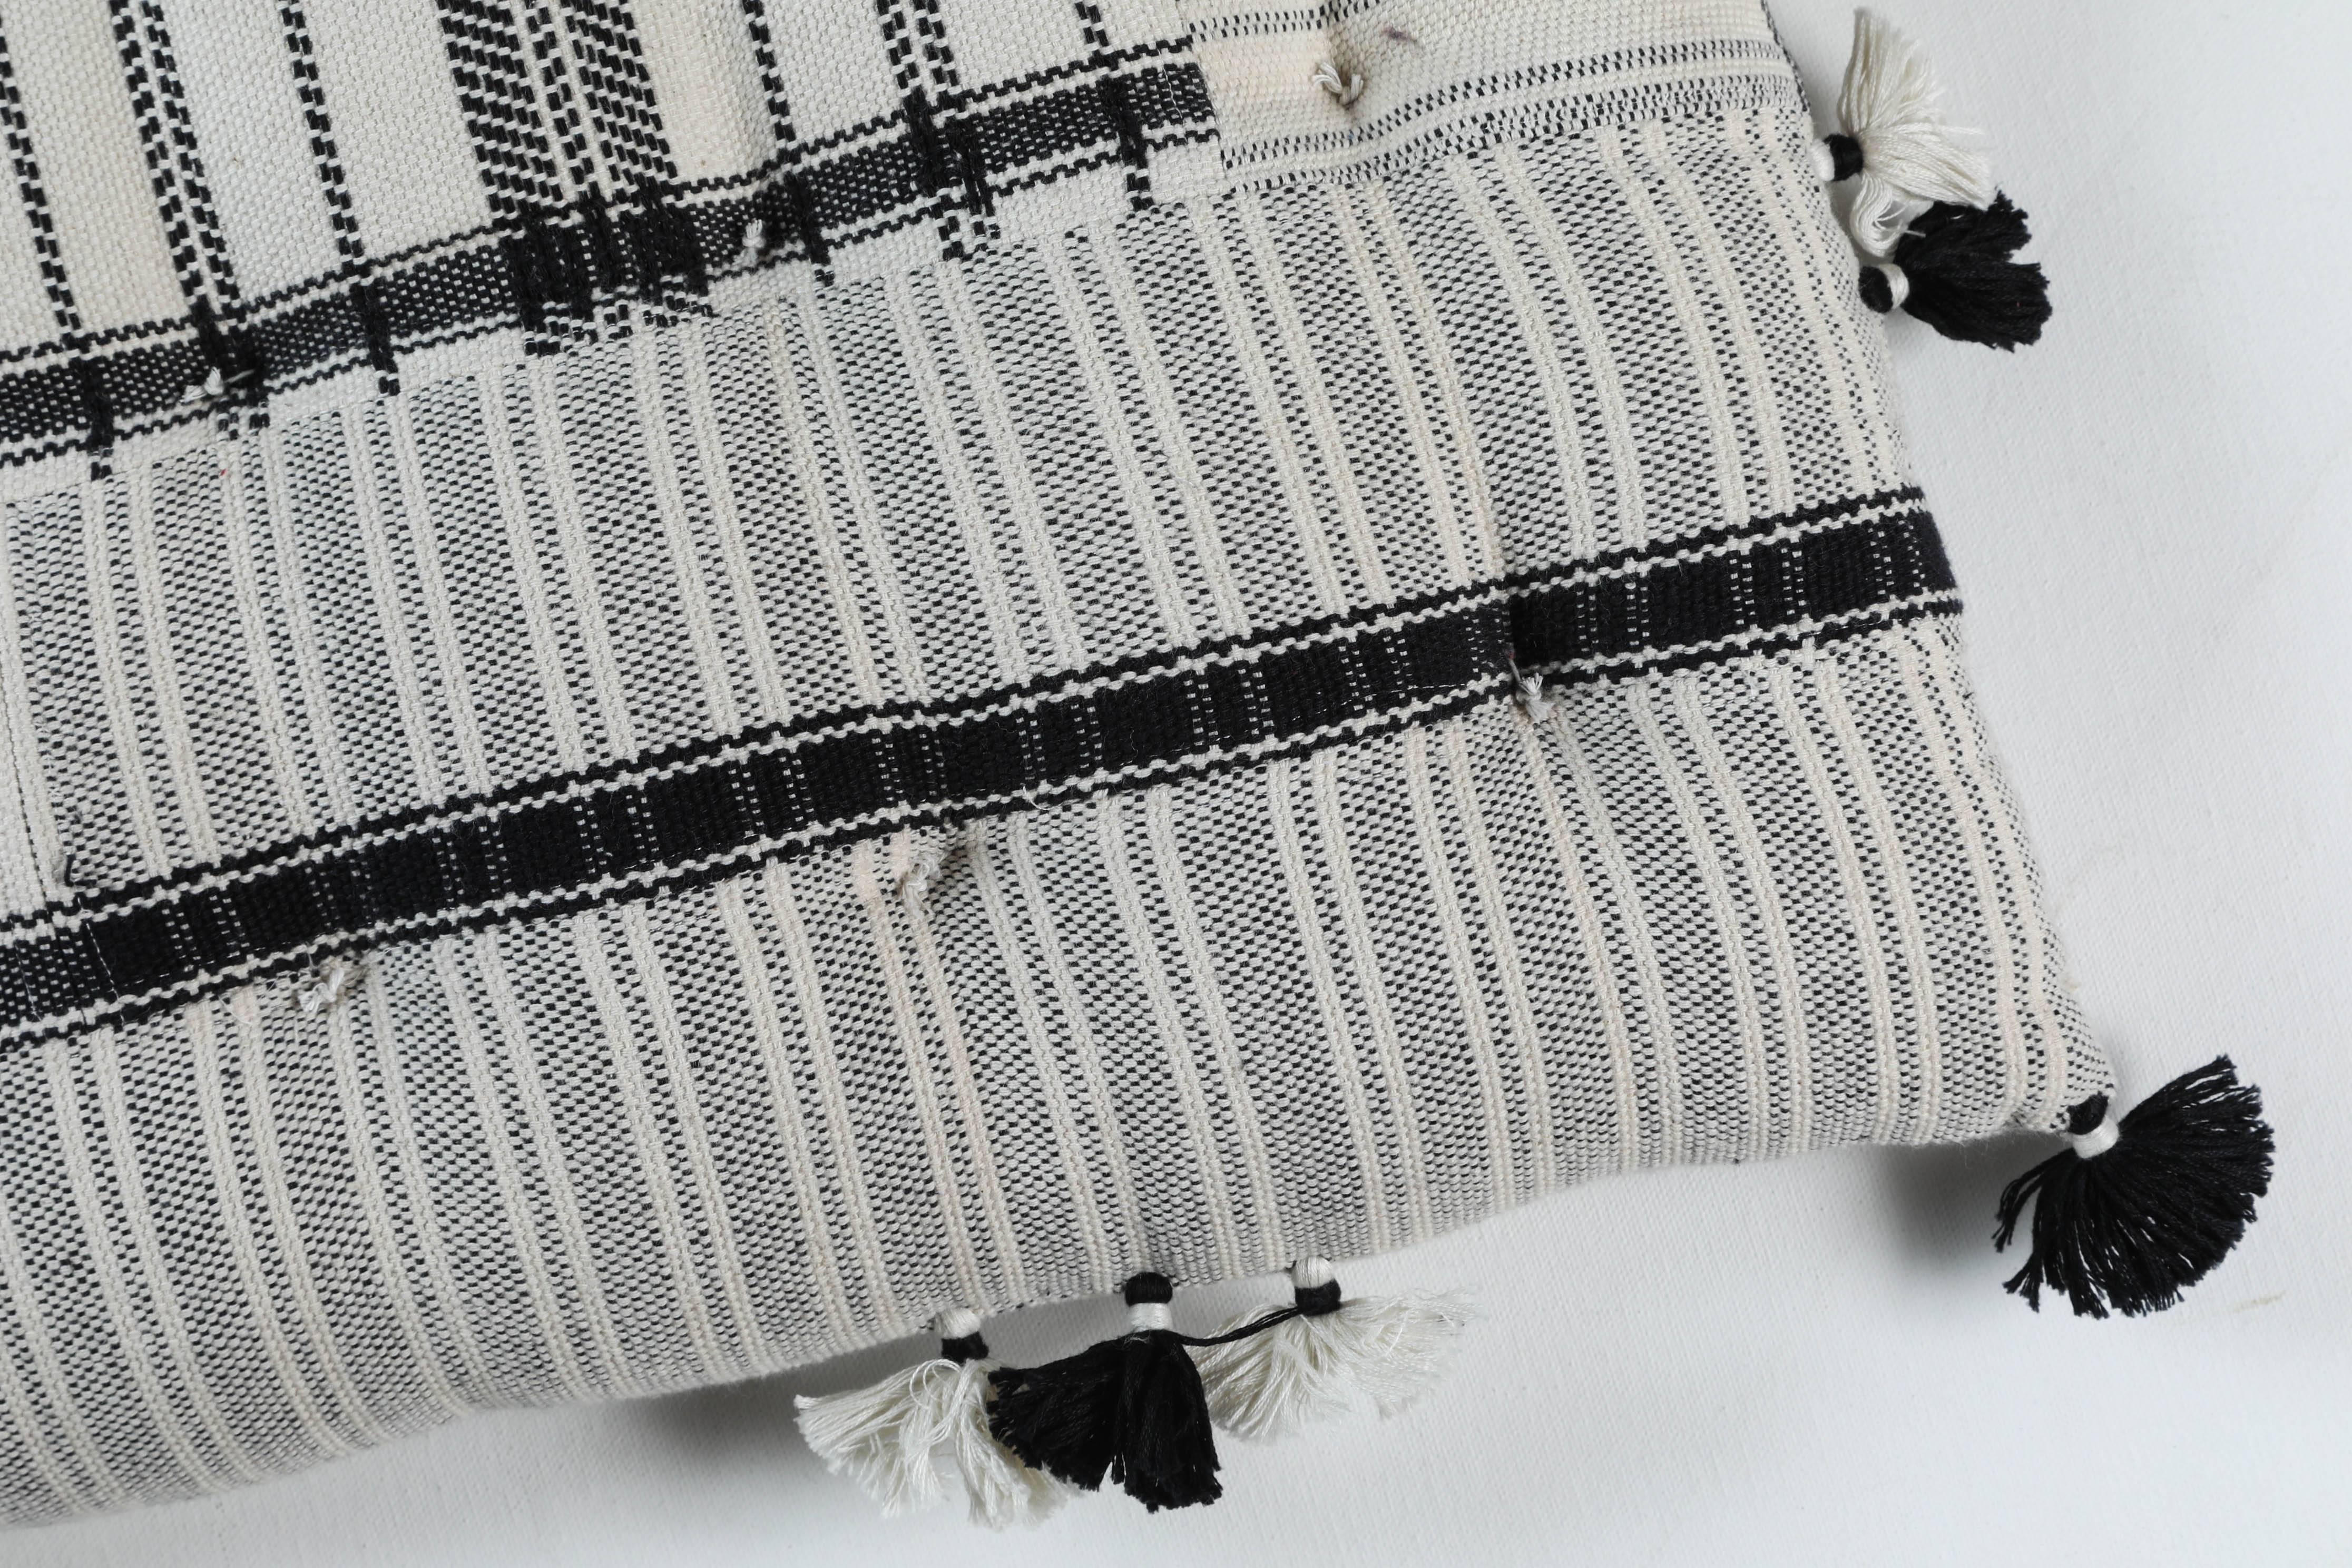 Kala naturally dyed organic cotton from Gujarat, India. Hand loomed using traditional Indian textile techniques to produce extra weft woven stripes and plaids. This black and white striped pillow has added hand-knotted tassels.